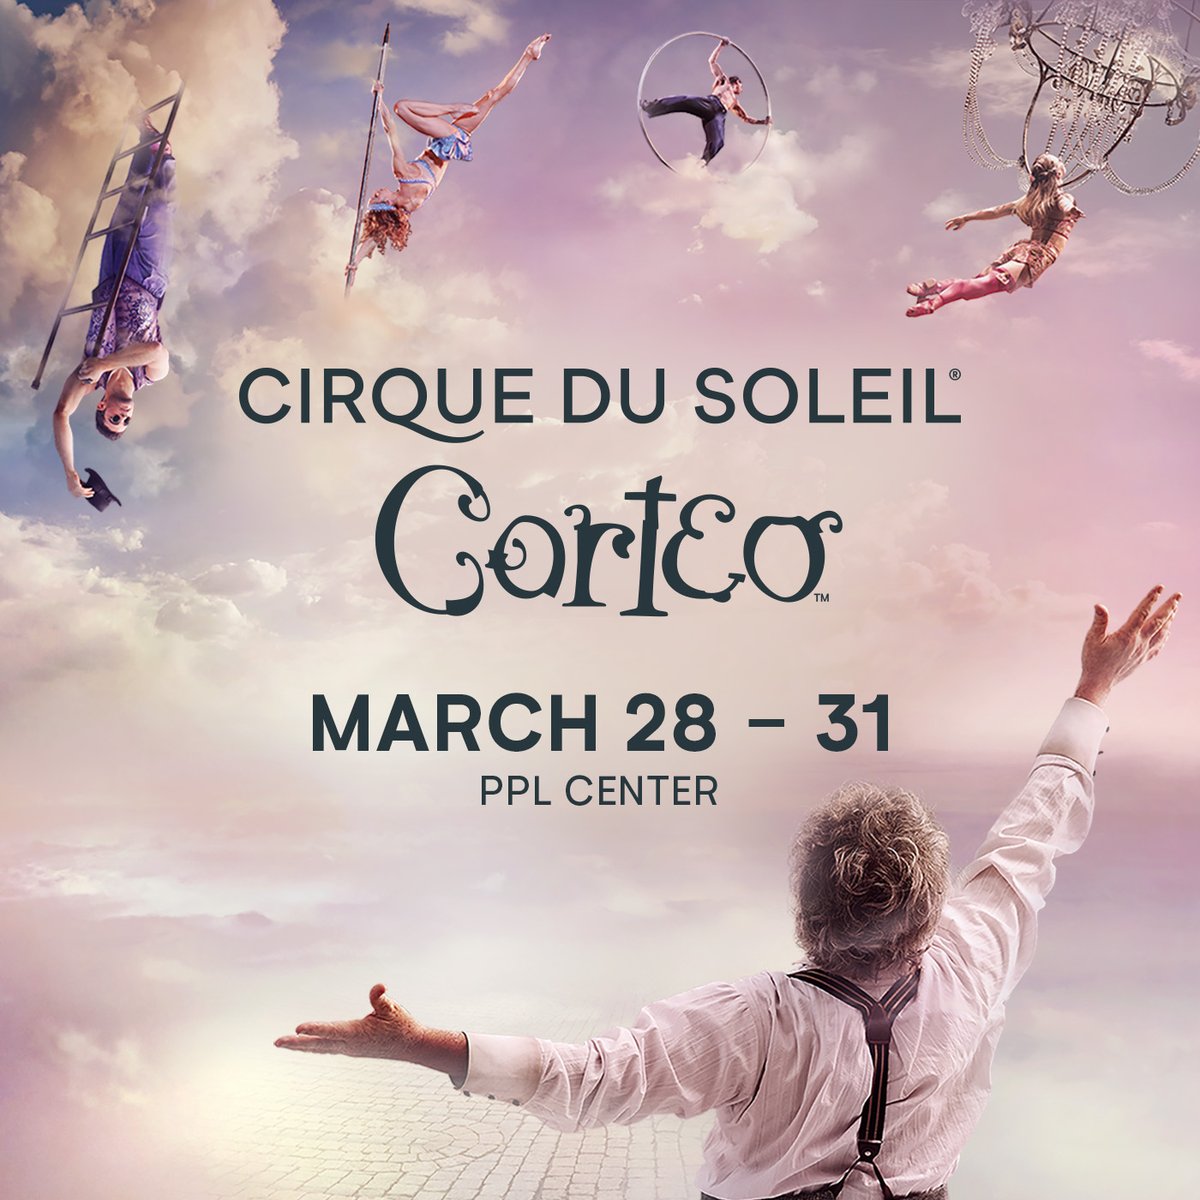 Elevate your week with the mesmerizing wonder of Cirque Du Soleil's Corteo! ✨ Tix at pplcenter.com🎟️